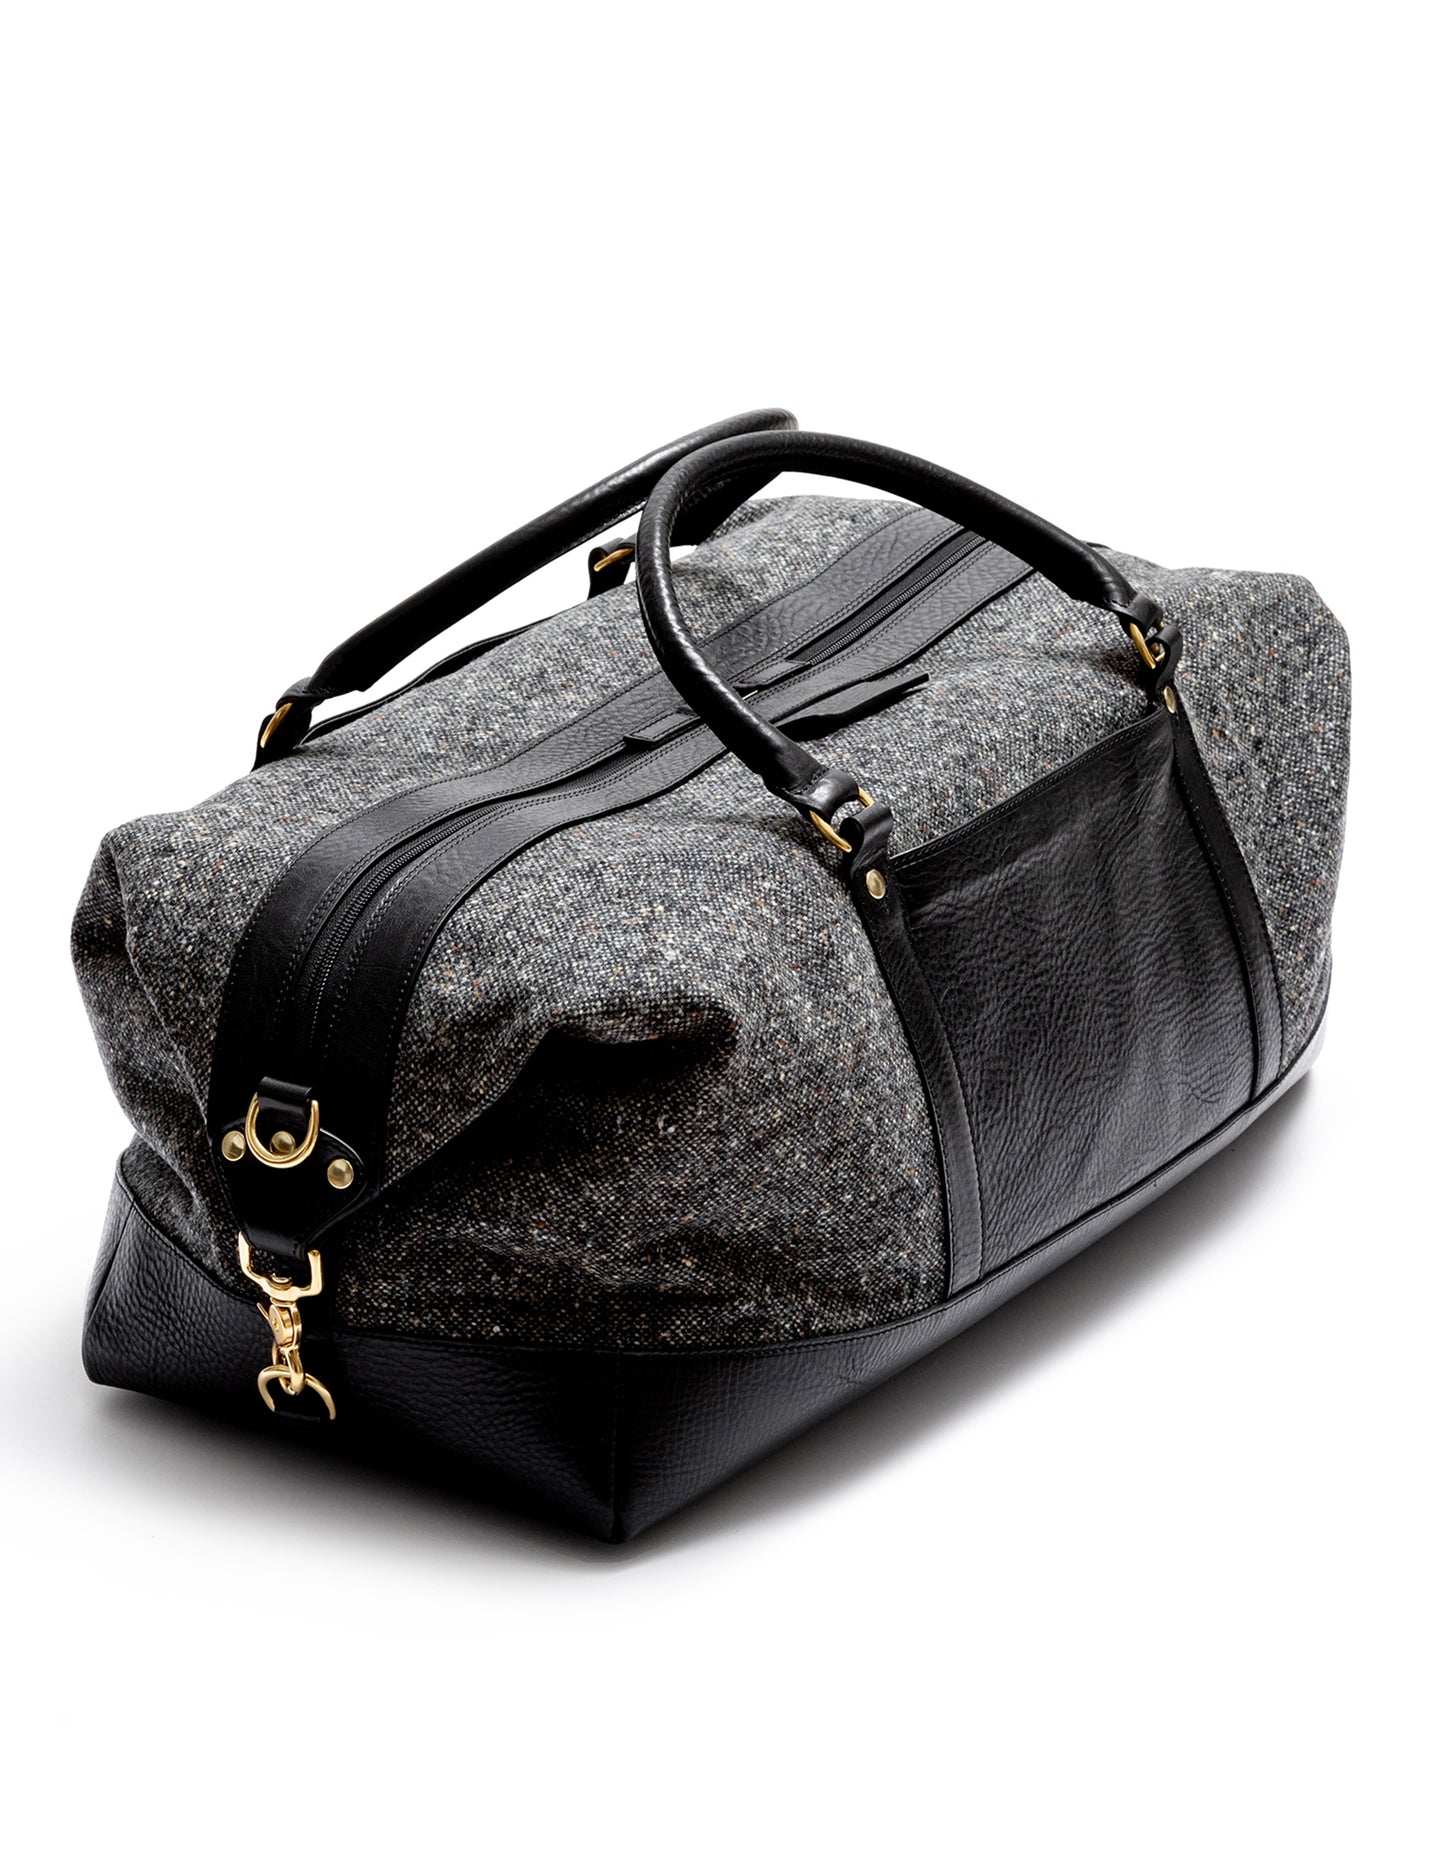 black and grey duffle bags